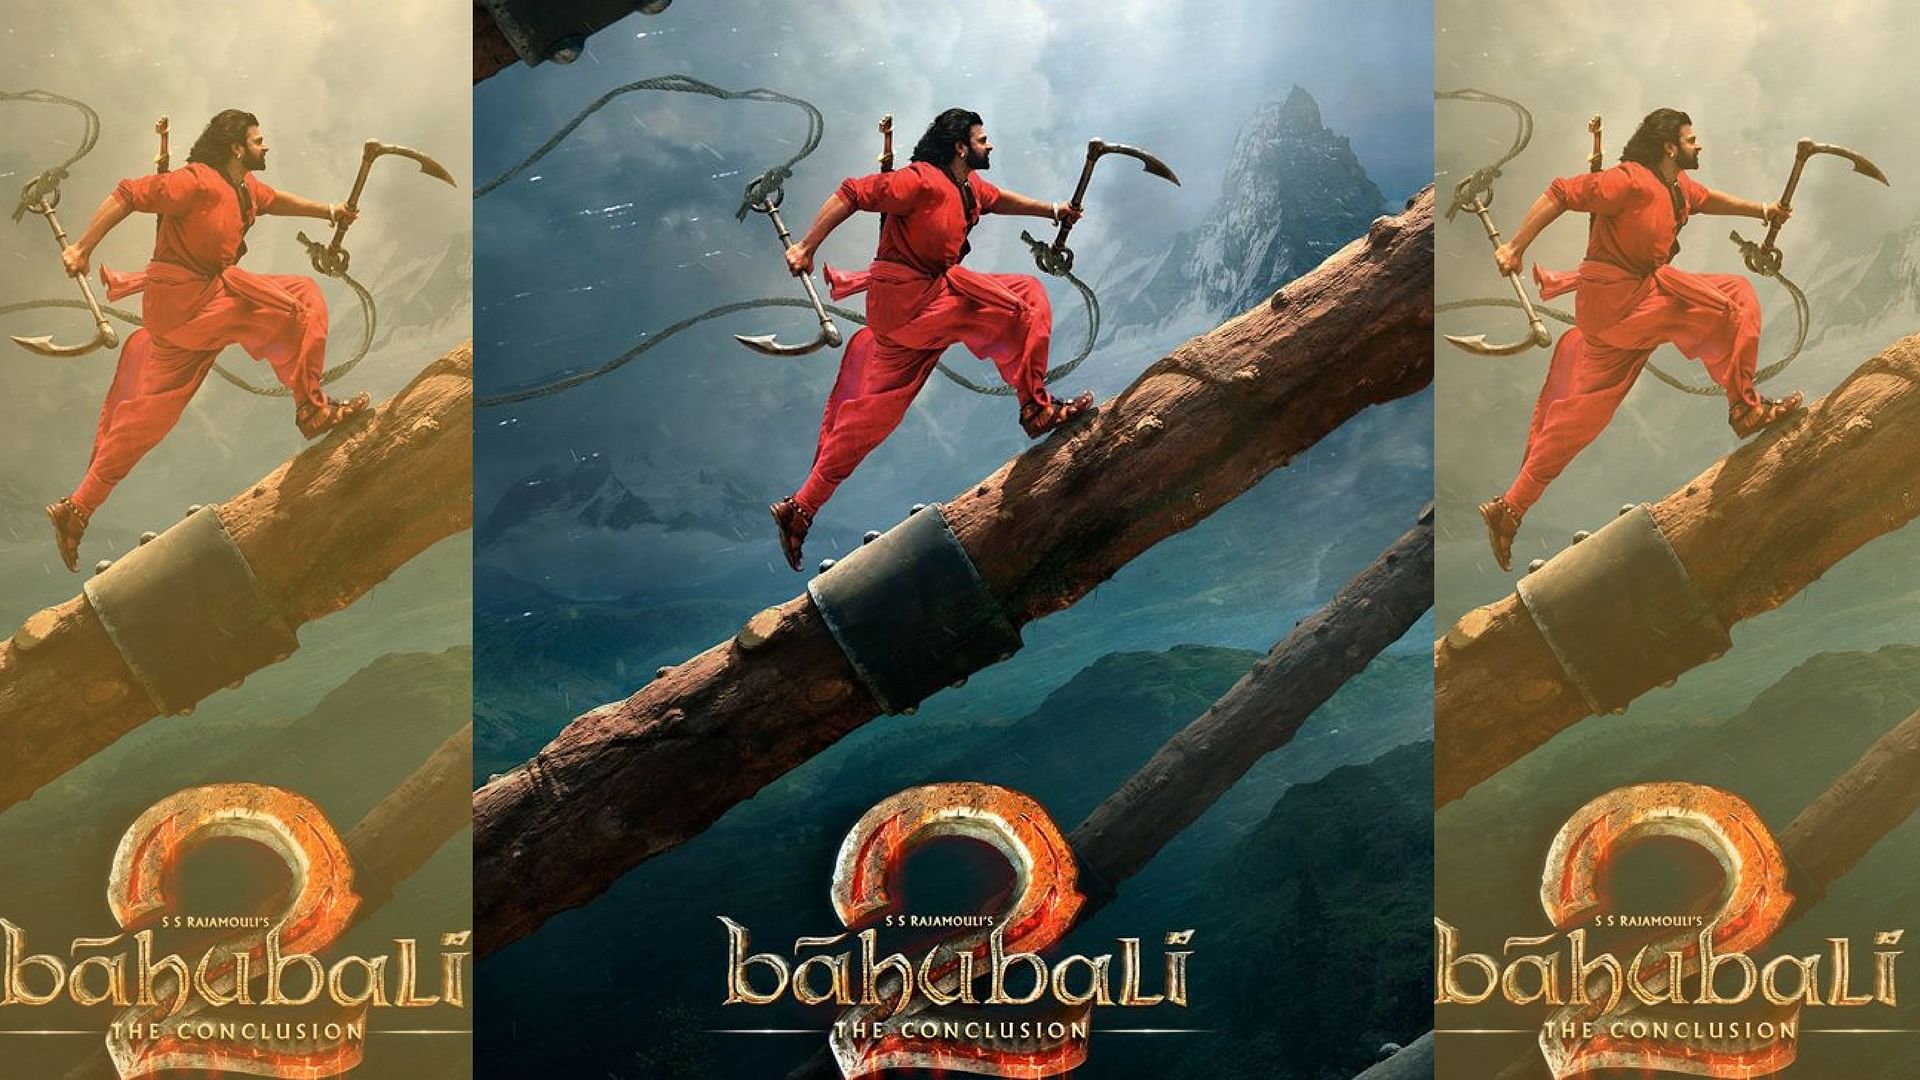 There is no stopping&nbsp;<i>Baahubali 2 </i>at the box-office.&nbsp;